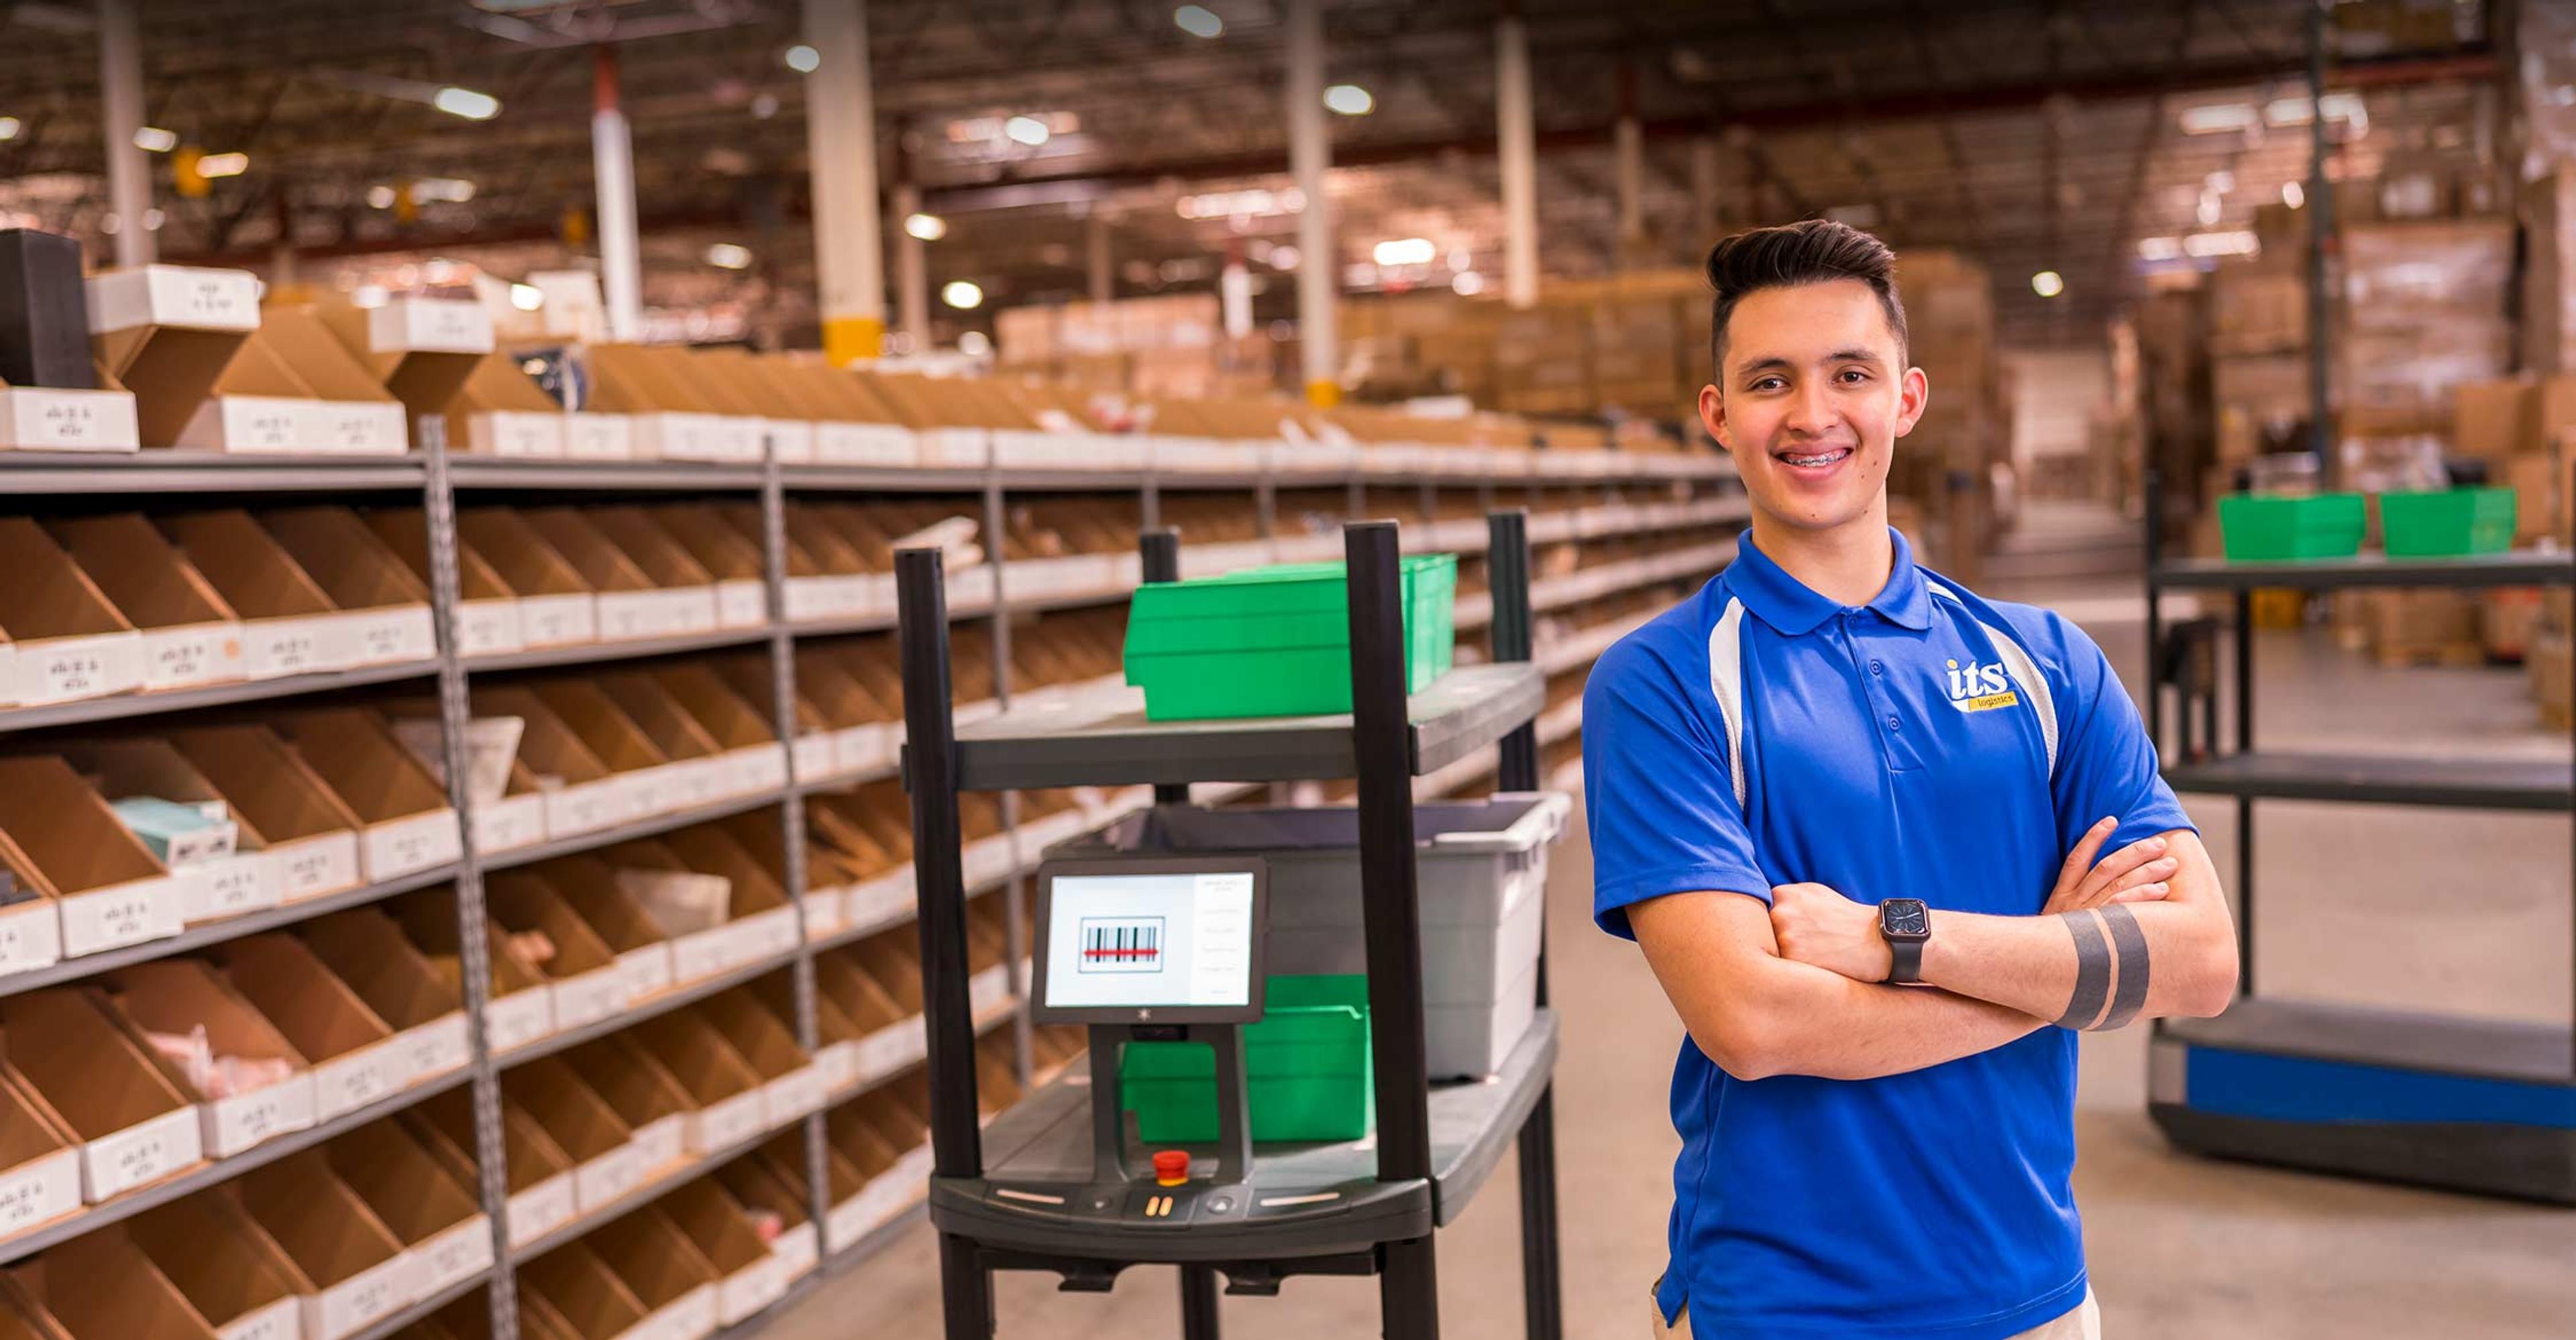 ITS team member smiling with arms crossed in warehouse